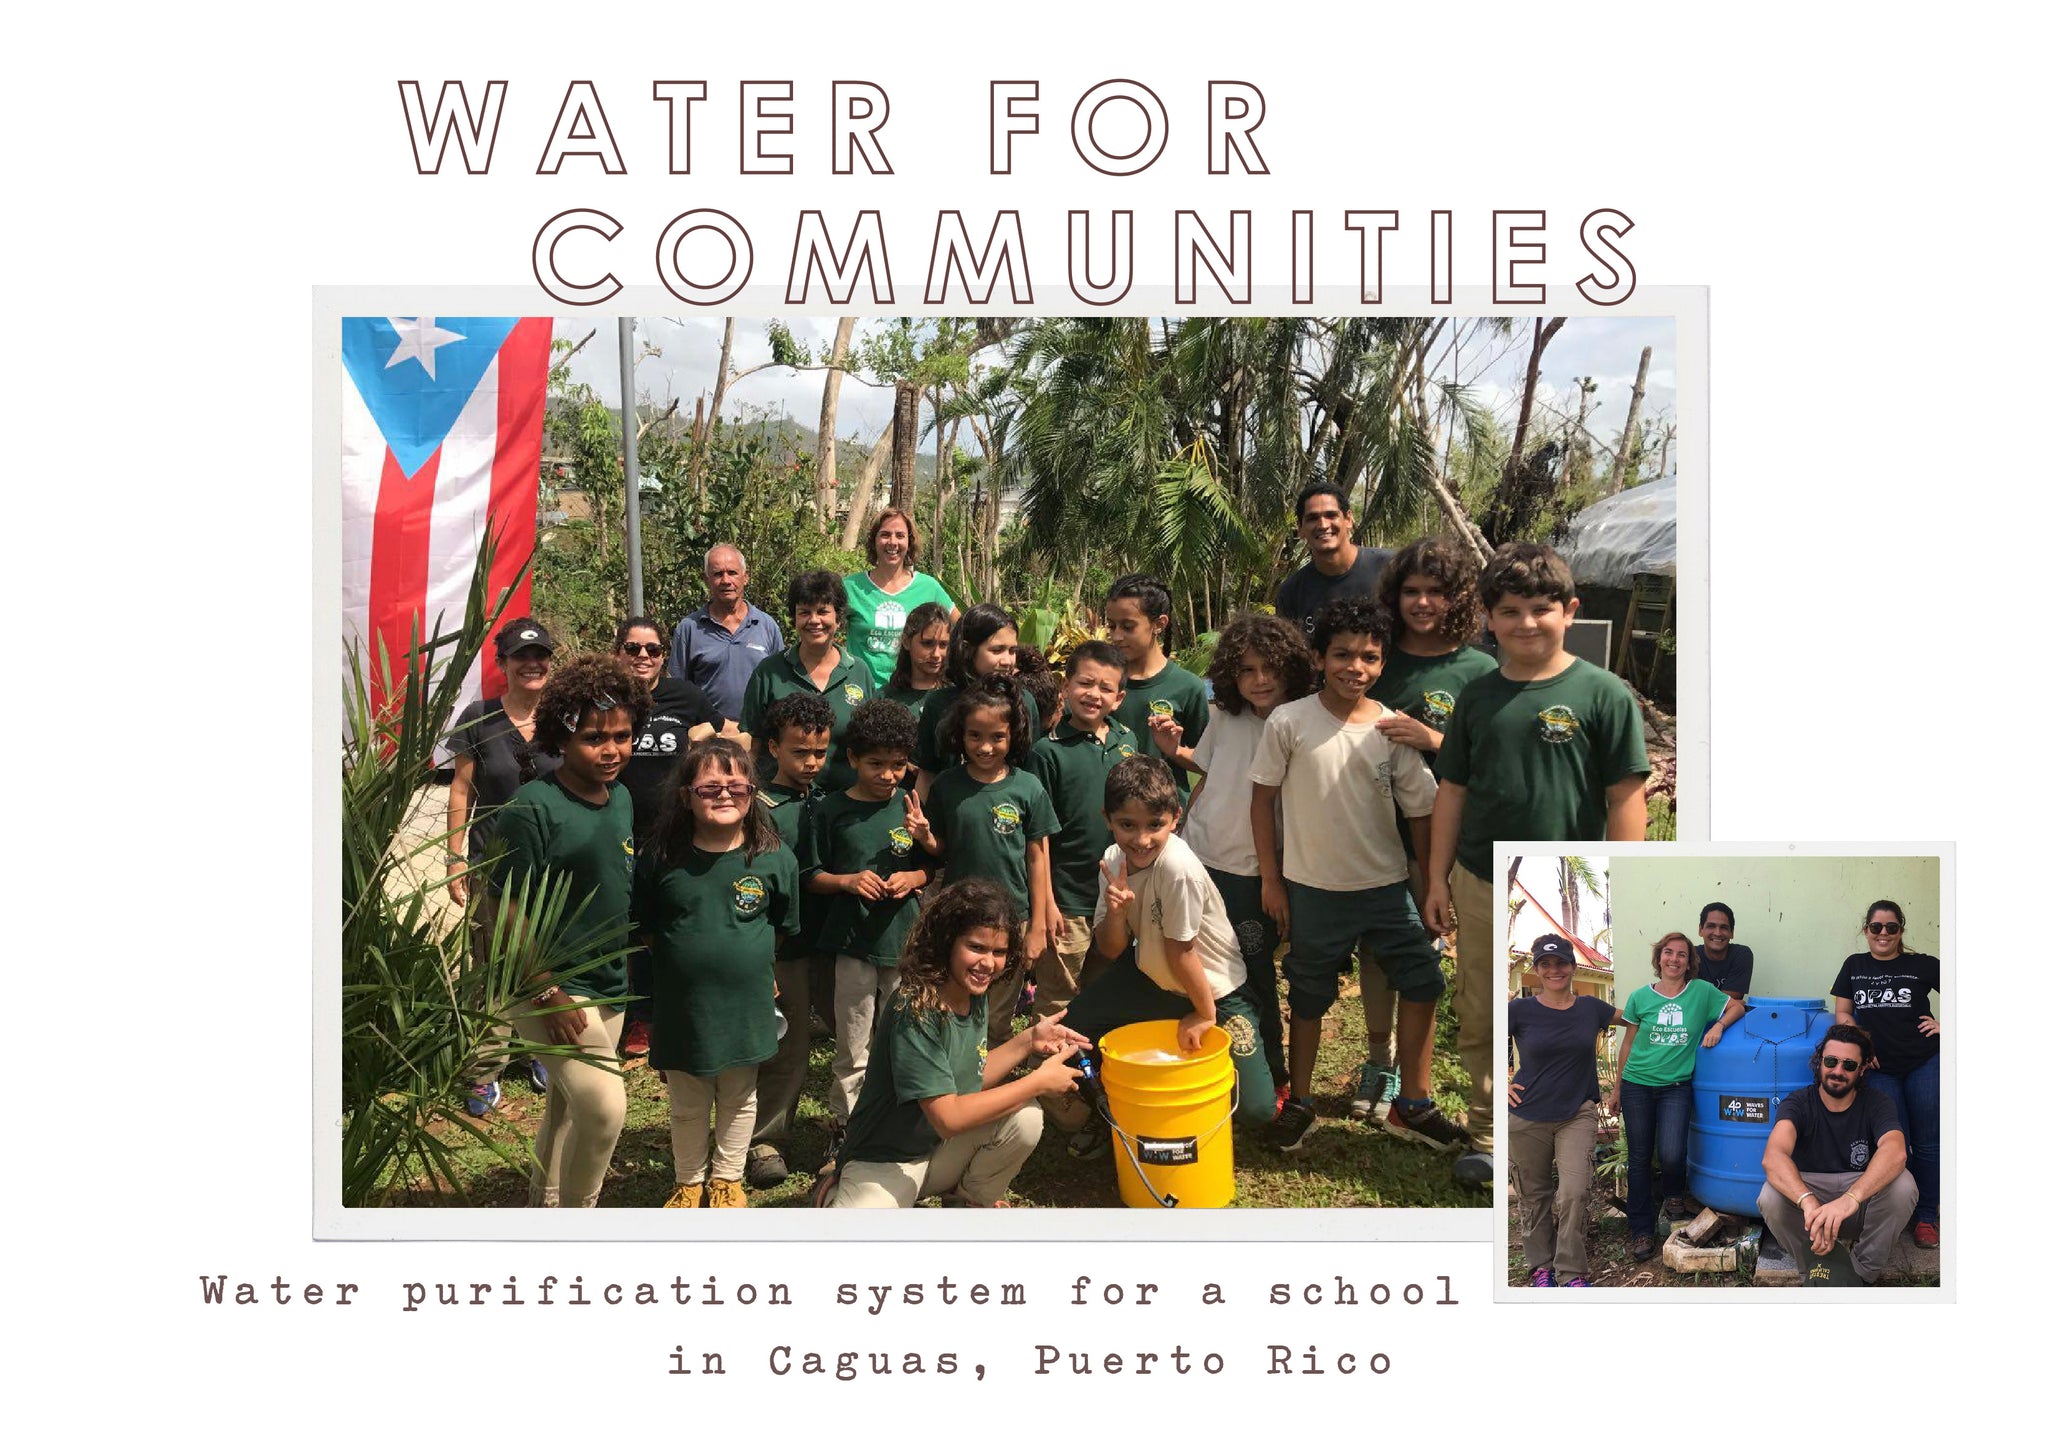 Water purification system for a school in Caguas, Puerto Rico.